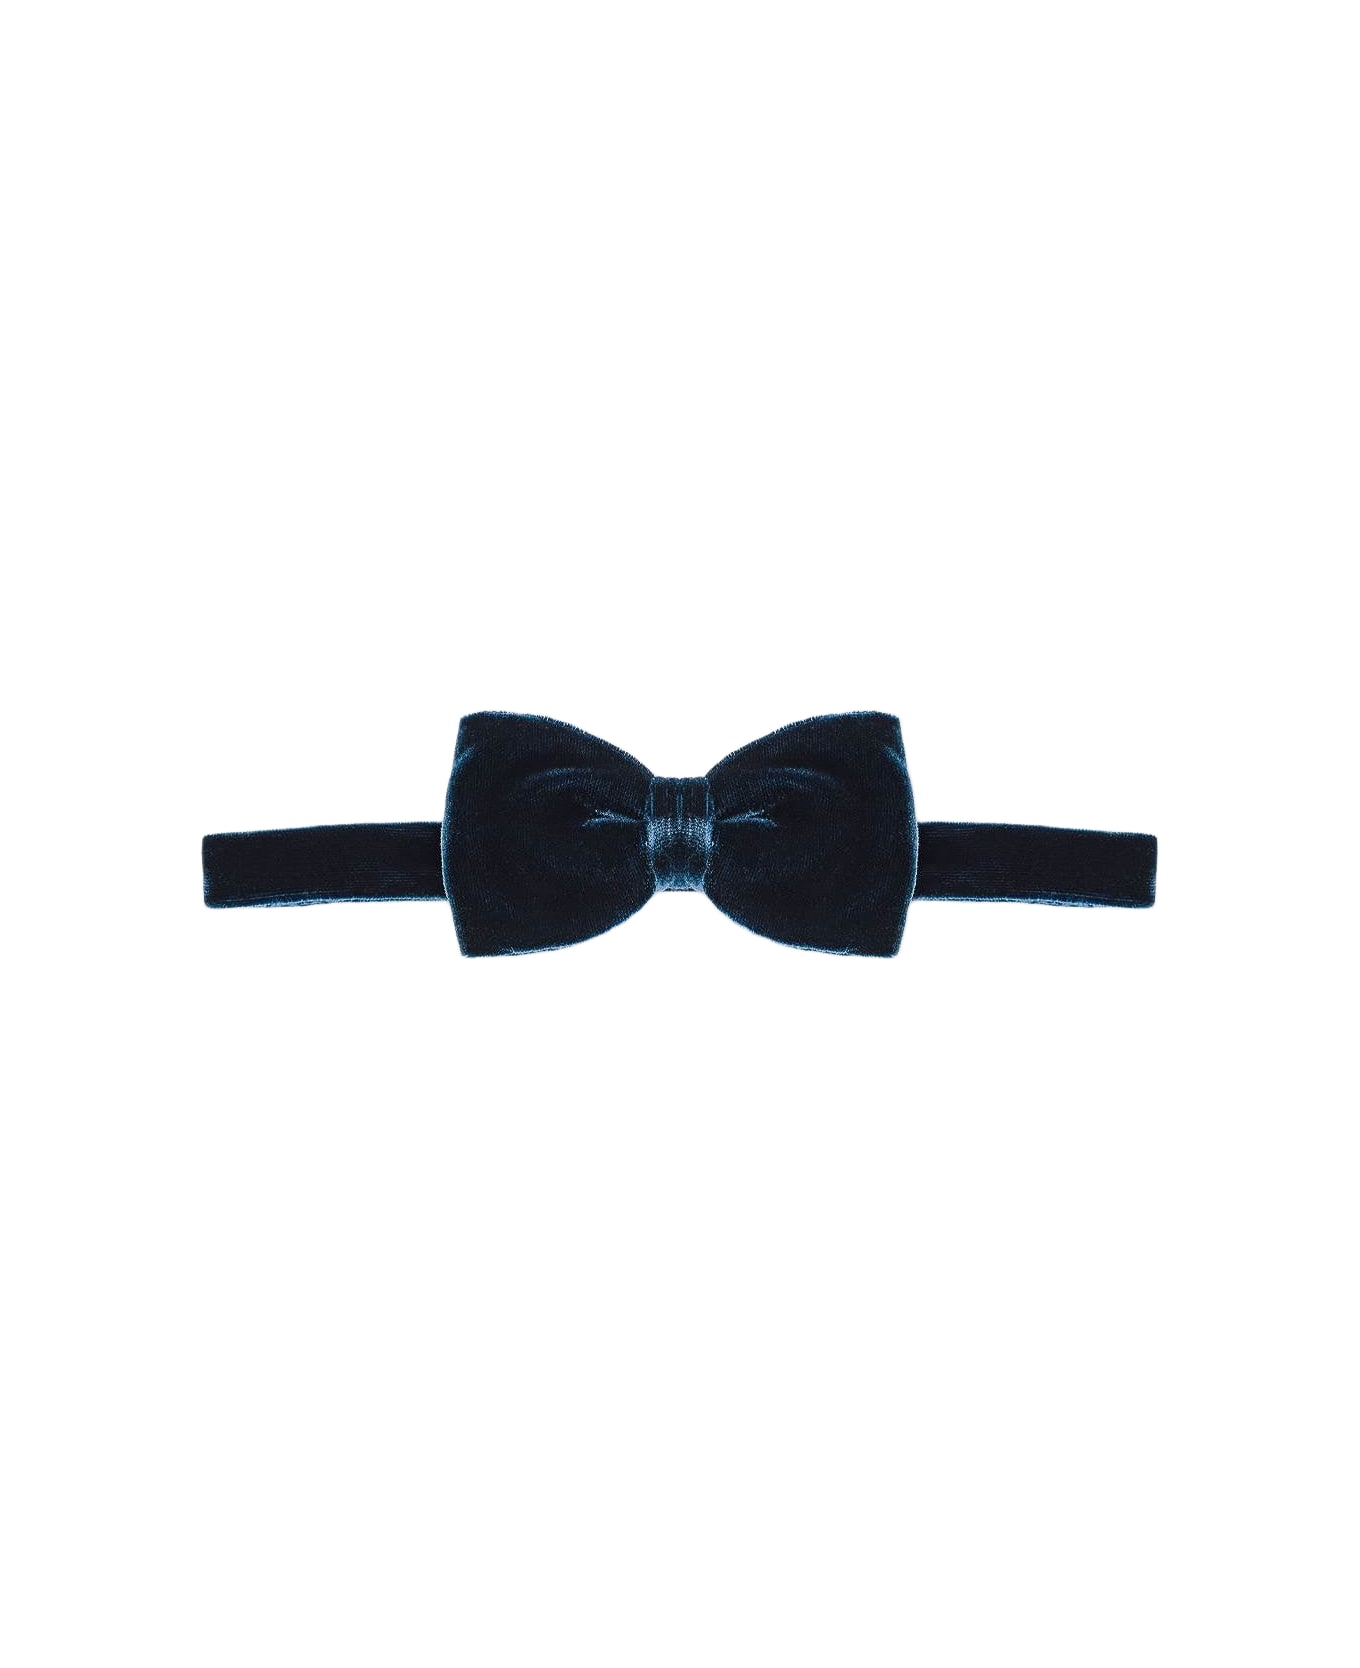 Larusmiani Bow Tie 'timeless' Tie - Teal ネクタイ